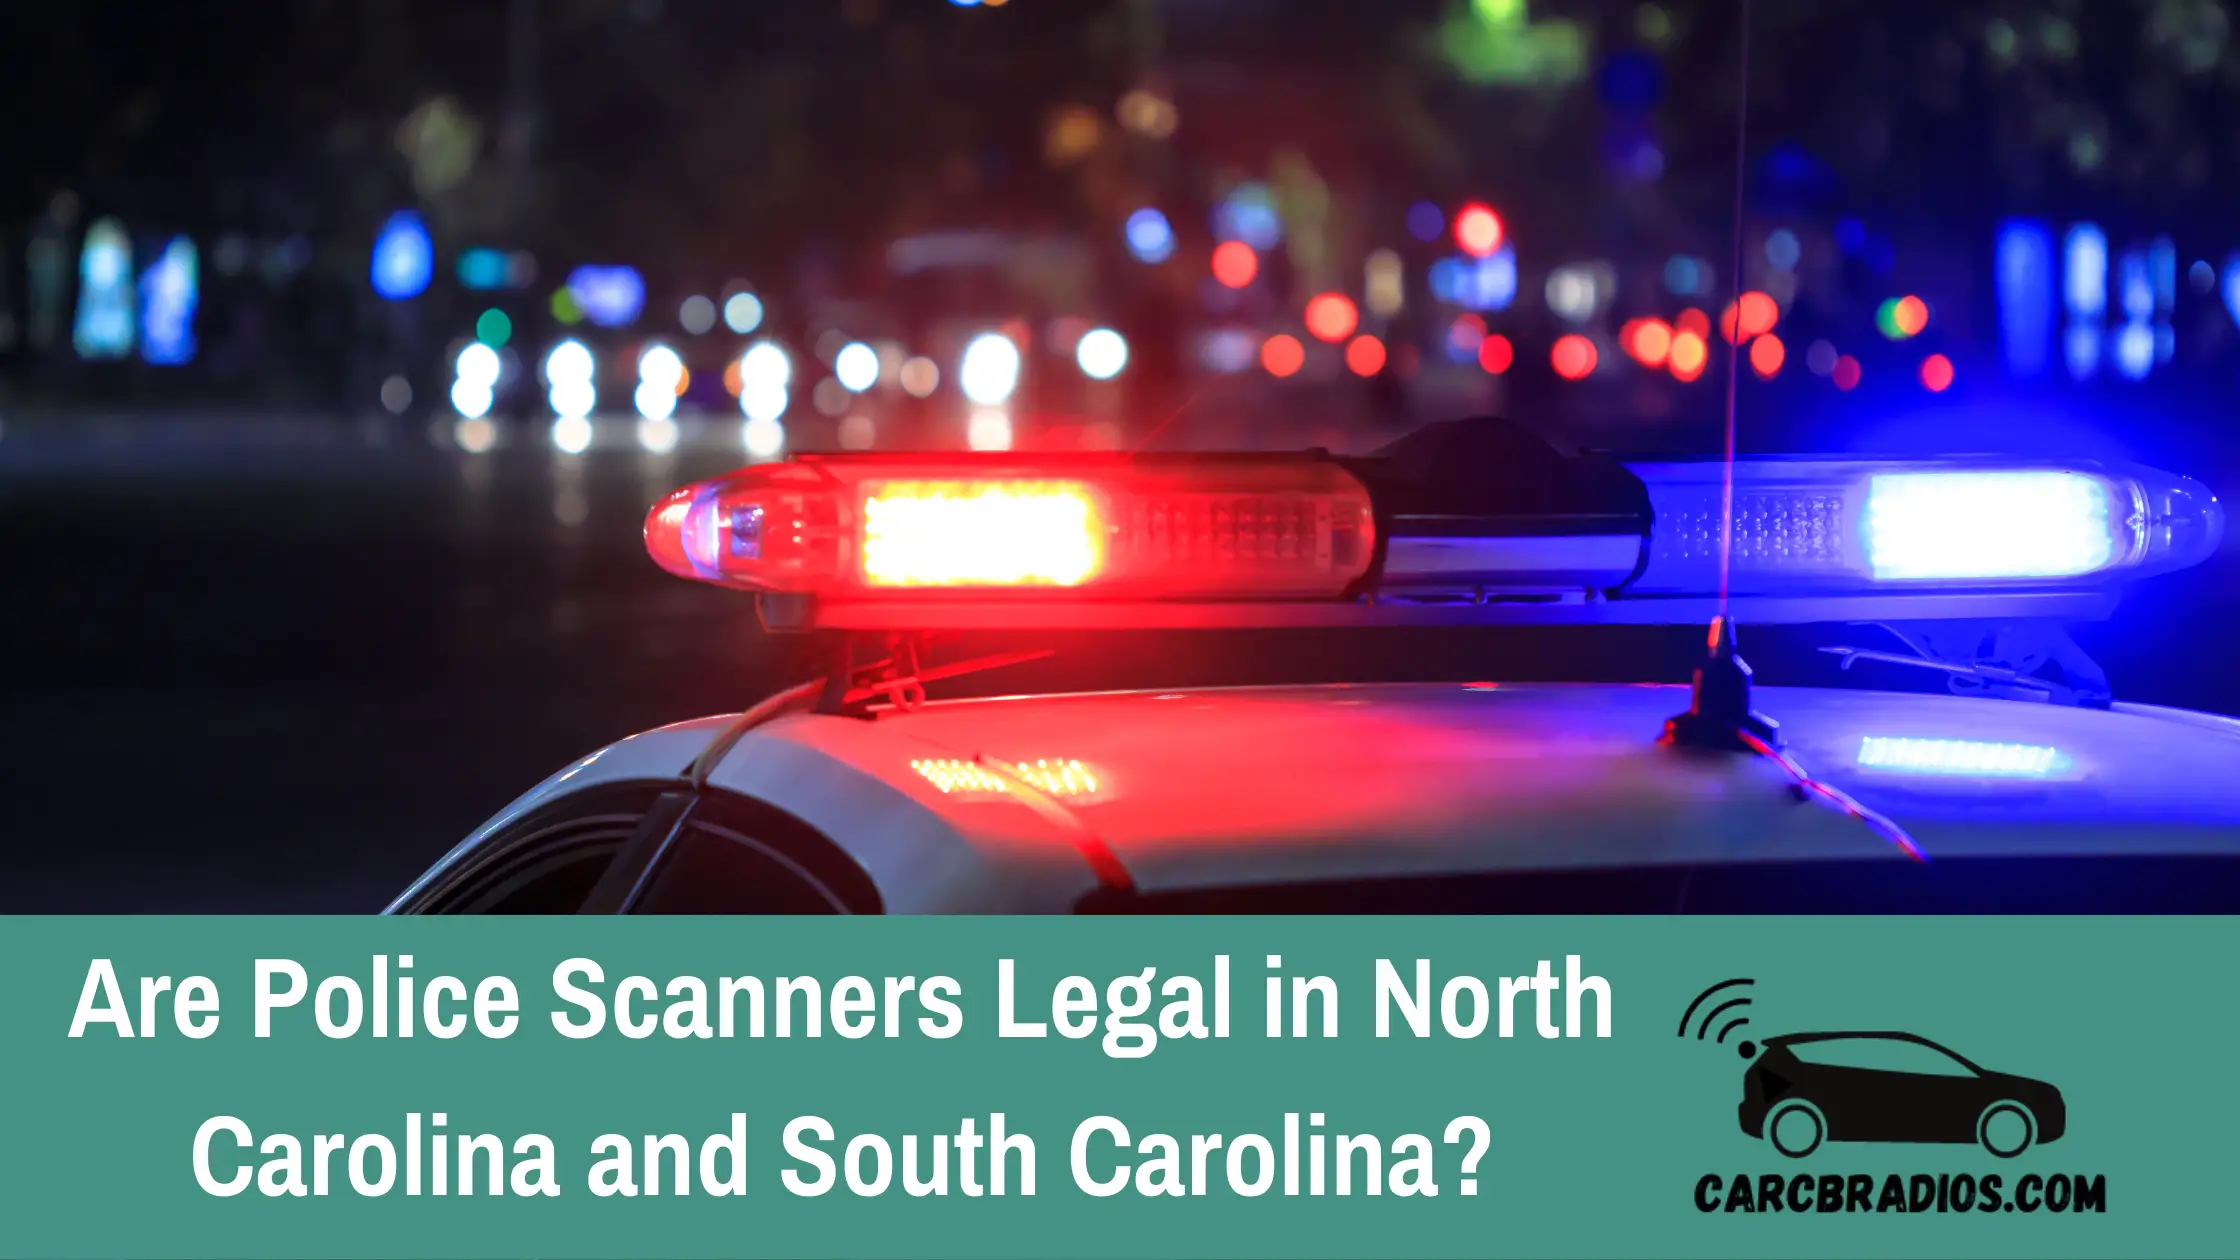 Are Police Scanners Legal in North Carolina and South Carolina